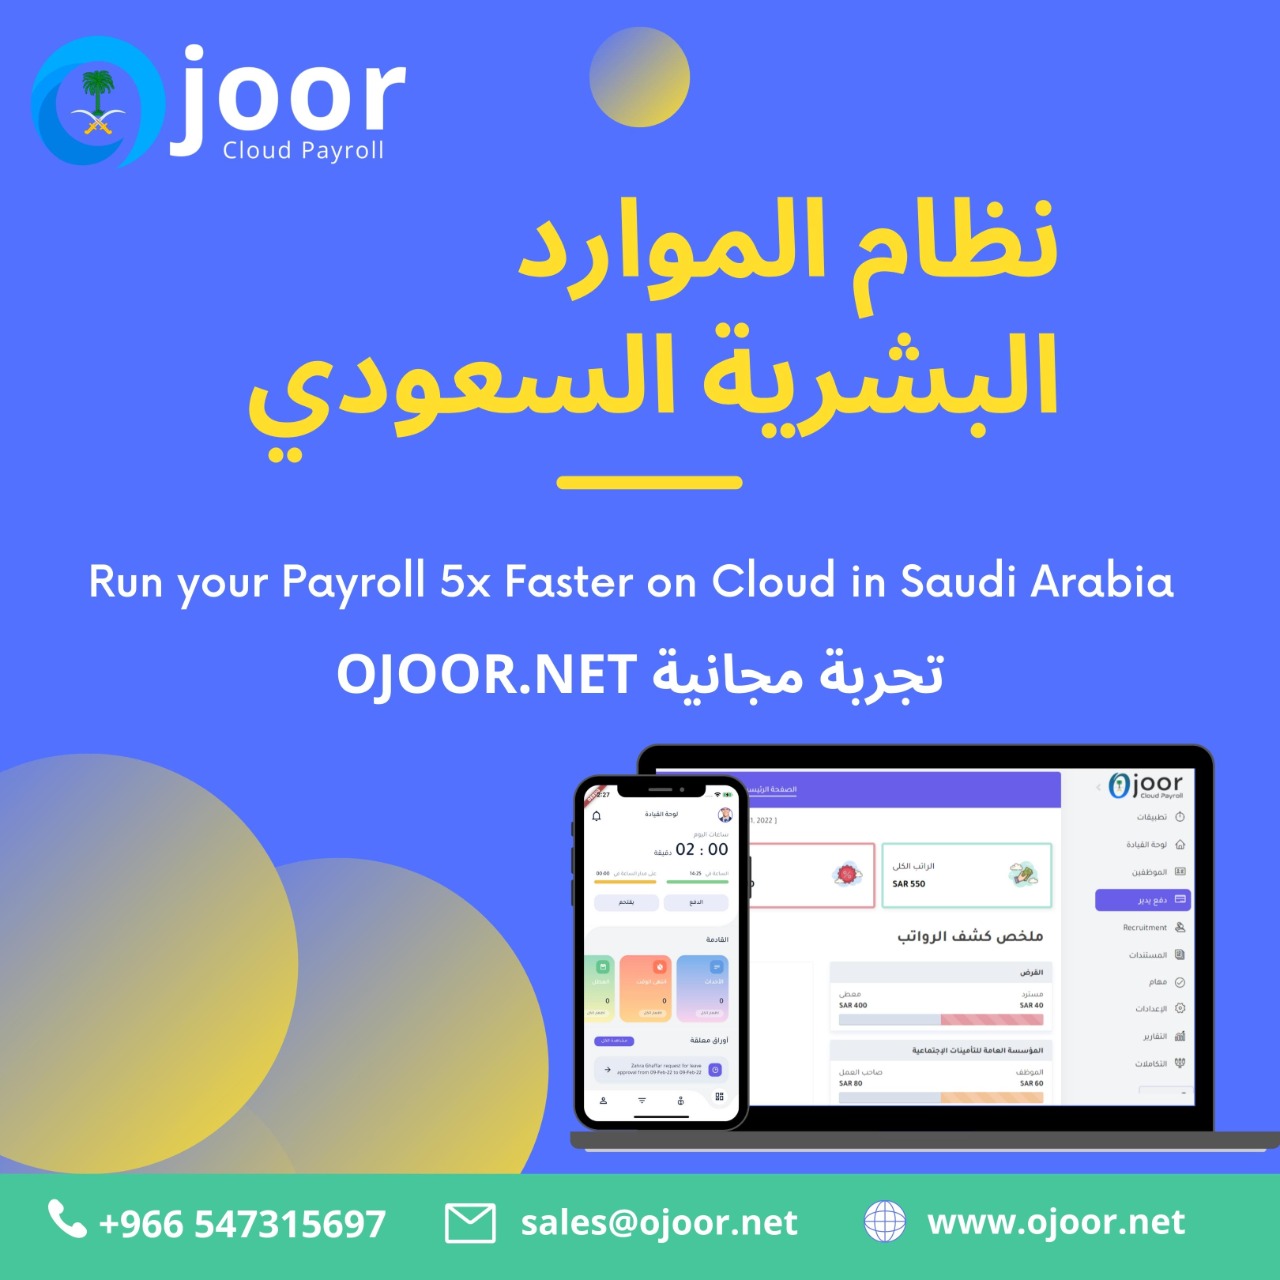 How to Effectively Manage Payroll Services by Payroll Software in Saudi?